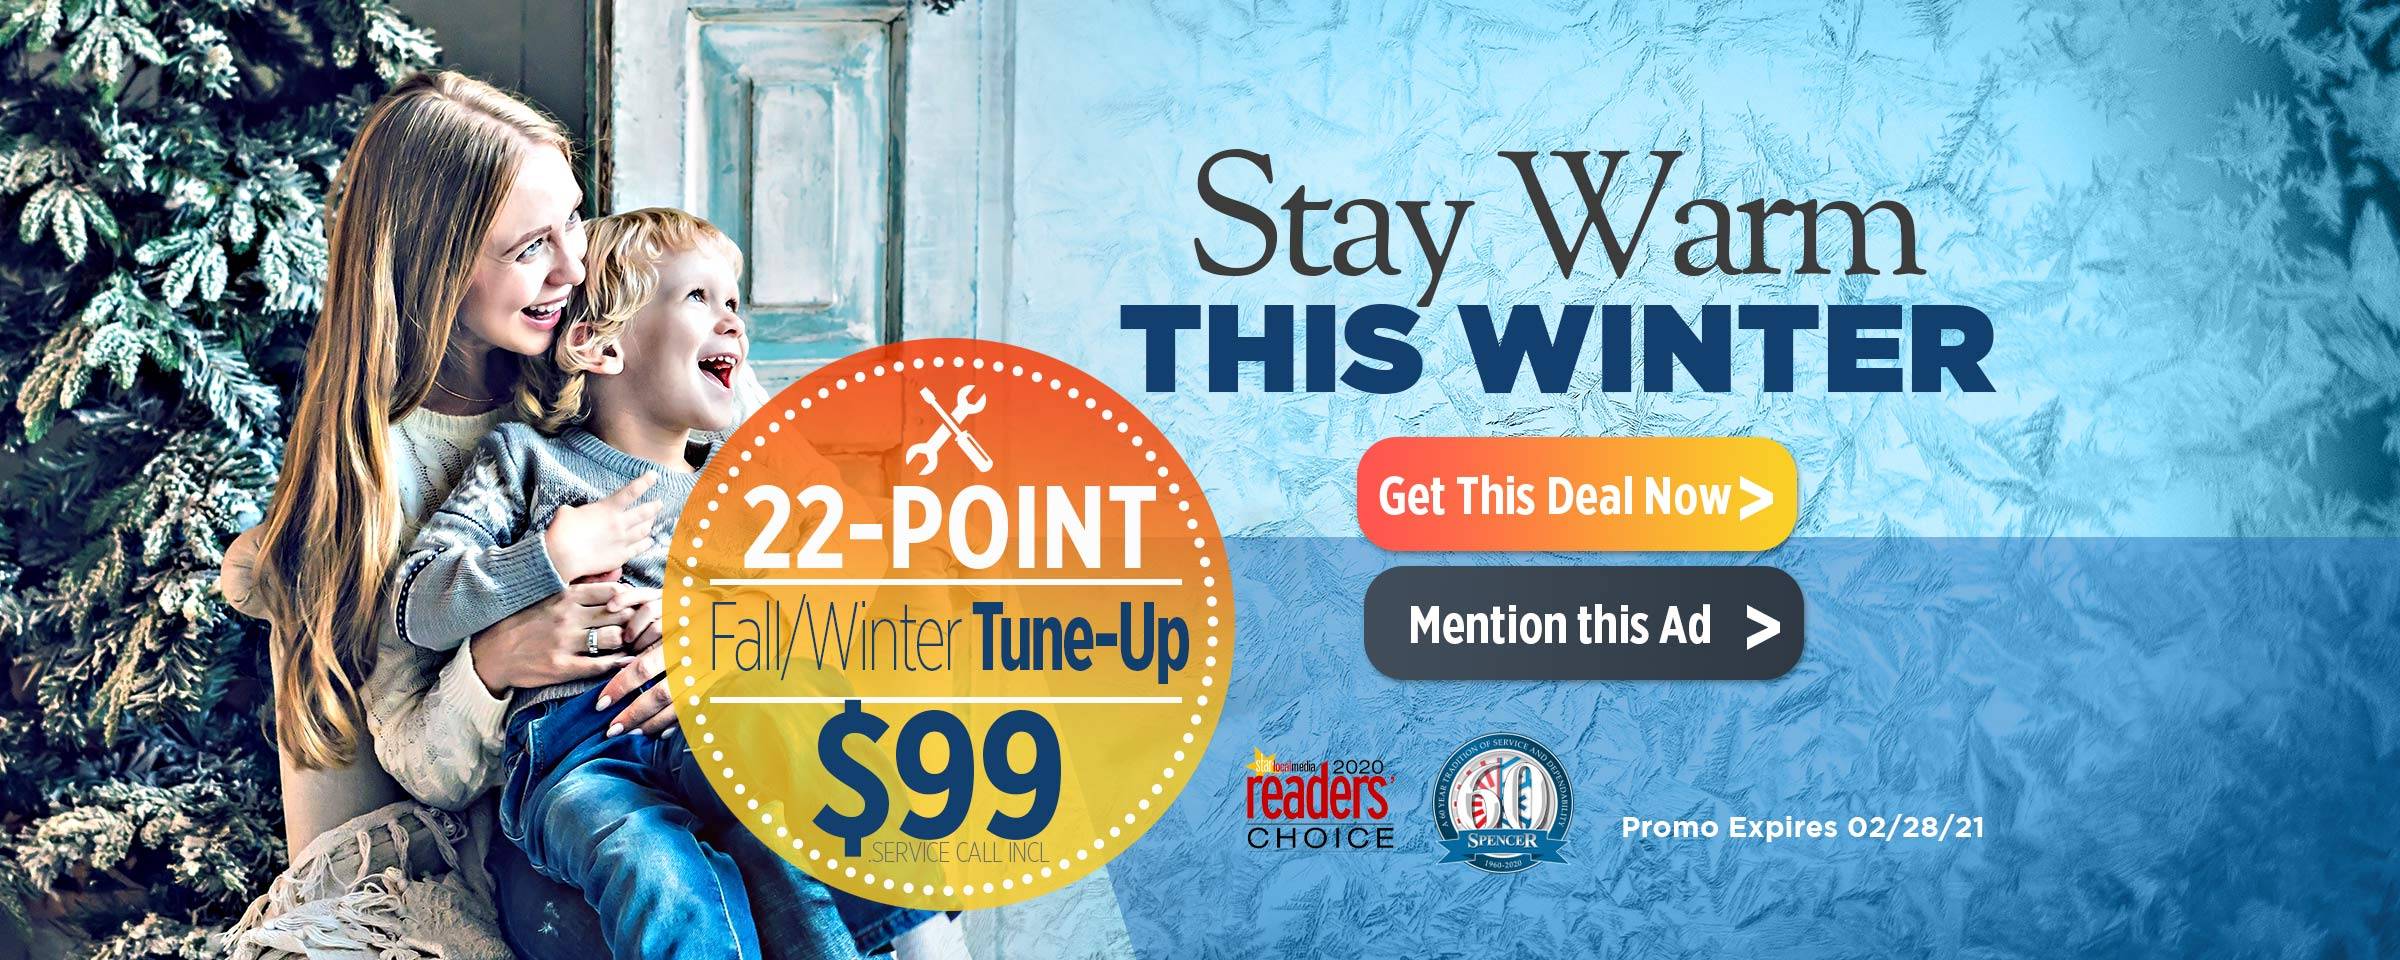 spencer promo stay warm this winter 22 point fall/winter tune up $99